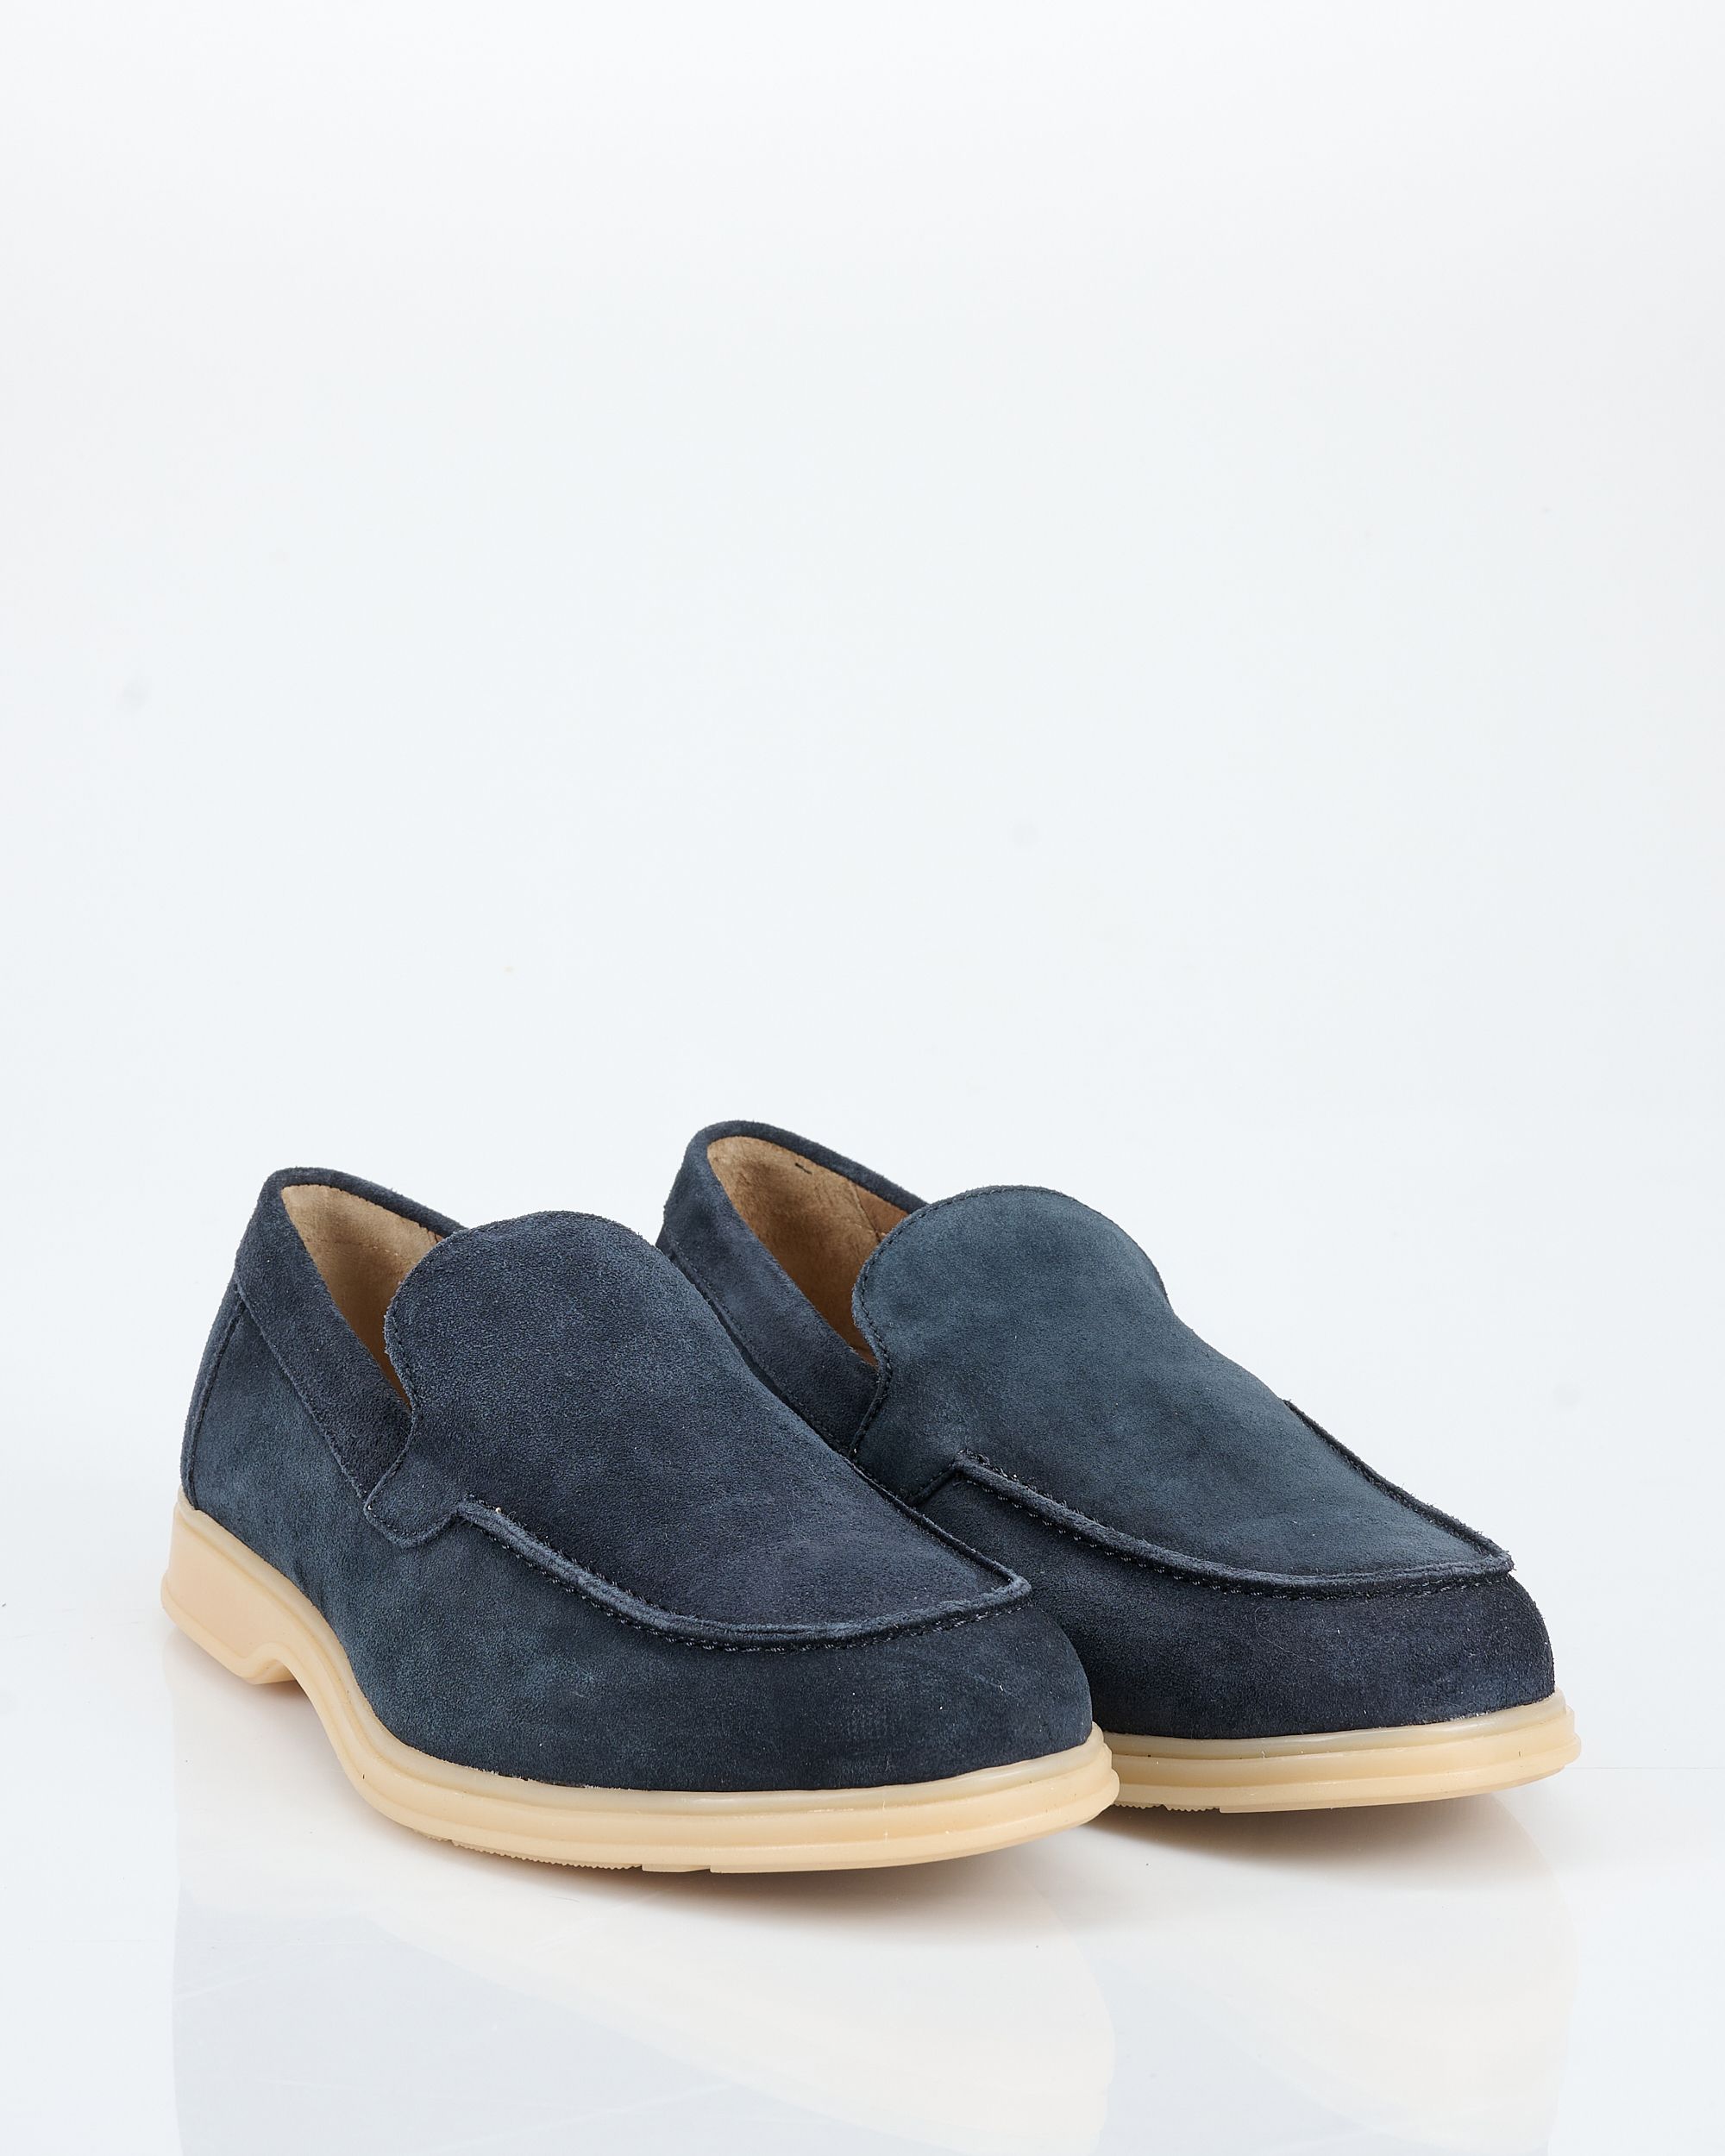 Campbell Classic Loafers Donkerblauw uni 075979-001-40